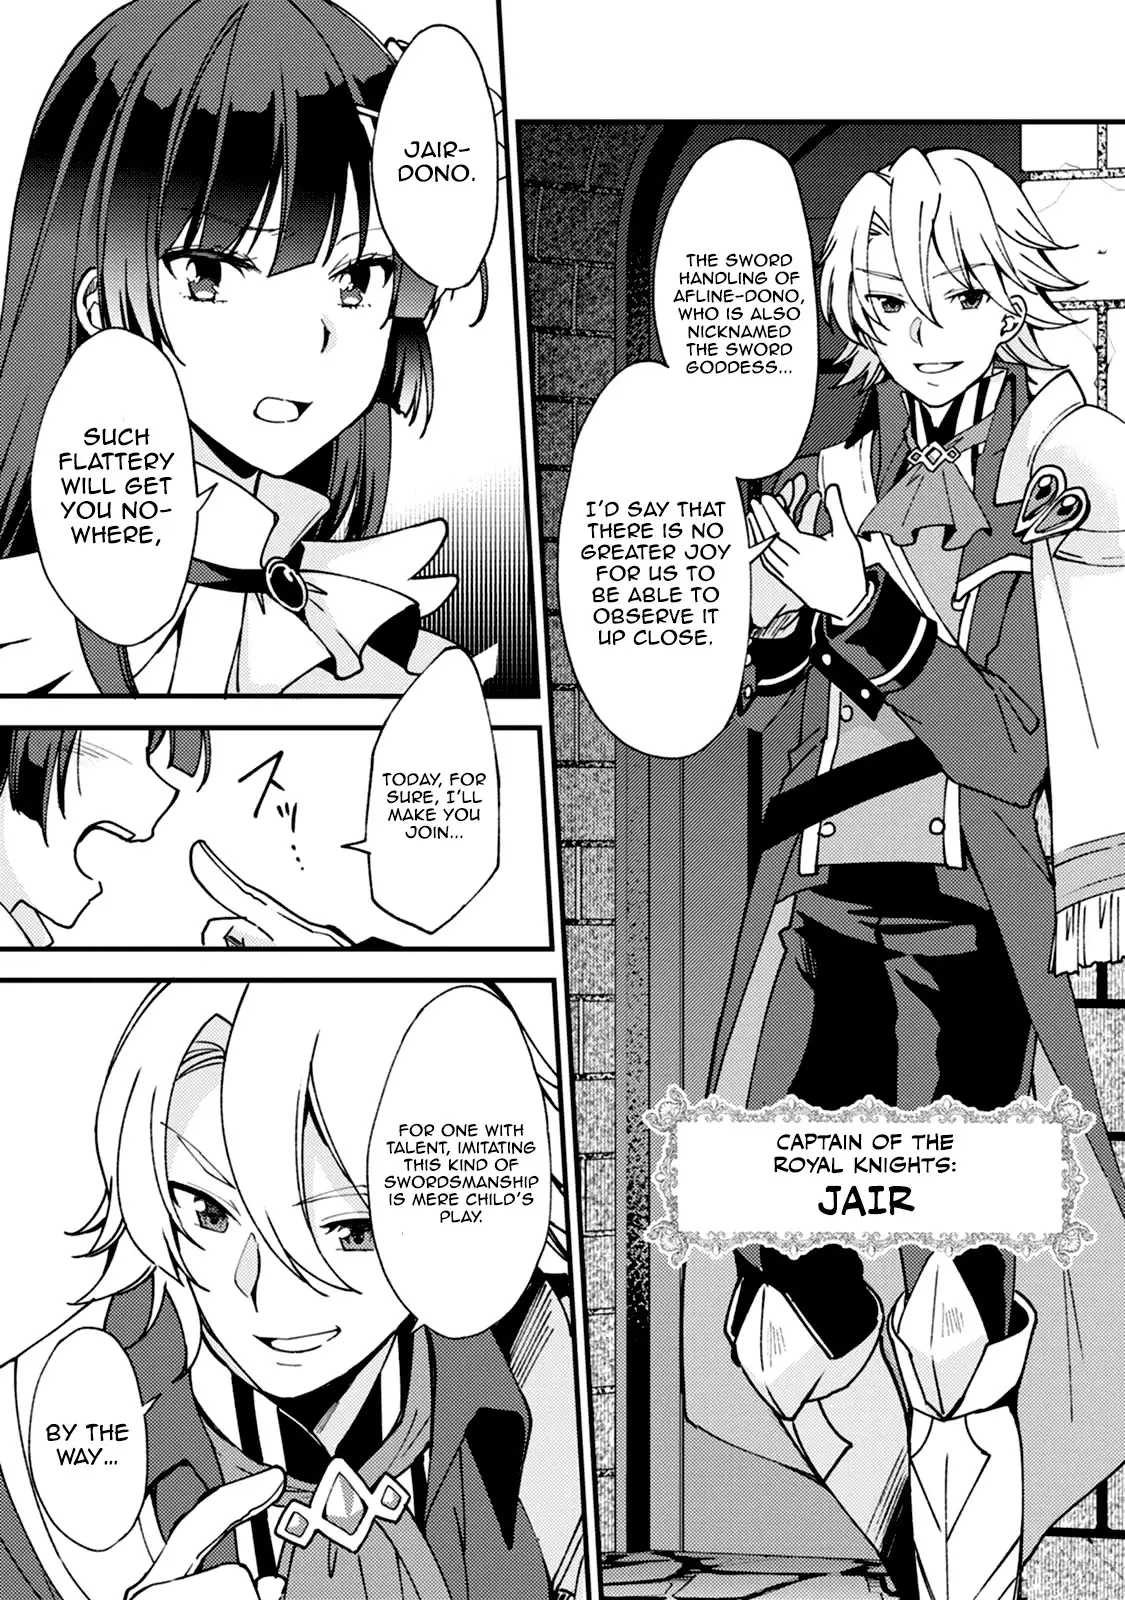 A Sword Master Childhood Friend Power Harassed Me Harshly, So I Broke Off Our Relationship And Make A Fresh Start At The Frontier As A Magic Swordsman. - 5 page 20